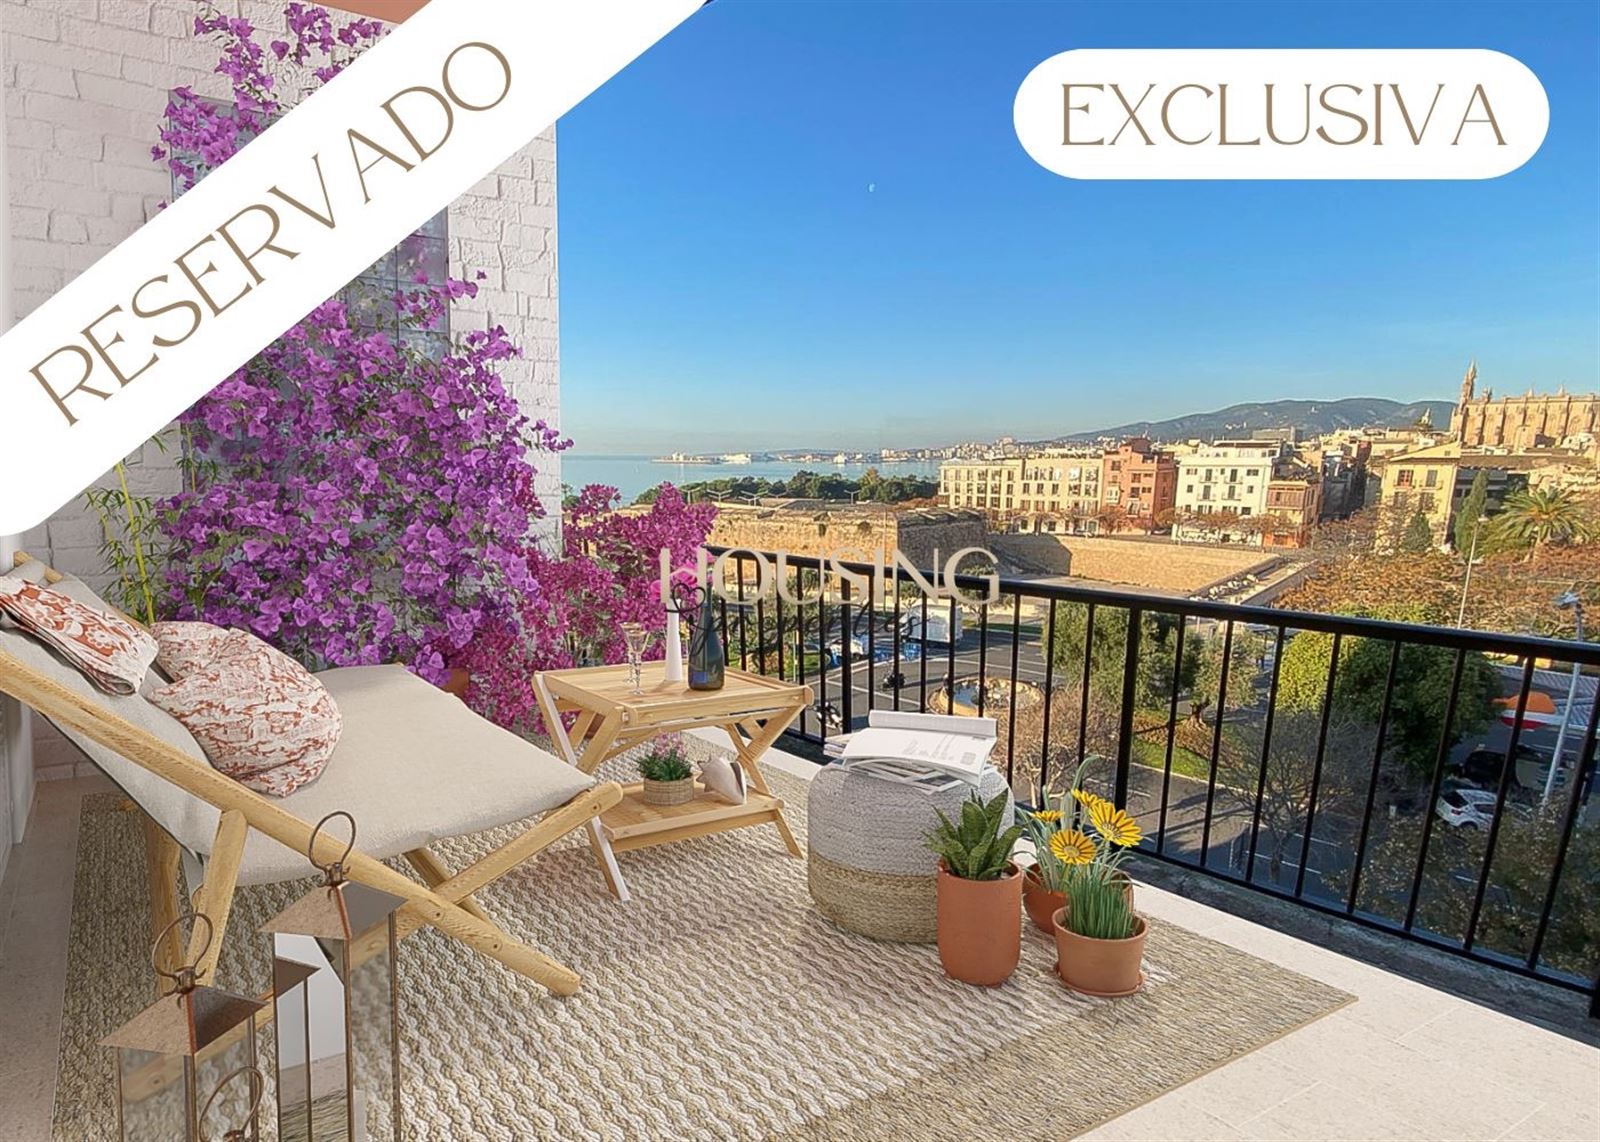 PENTHOUSE IN AVENIDA GABRIEL ALOMAR, A FEW METERS FROM THE SEA AND THE OLD TOWN OF PALMA